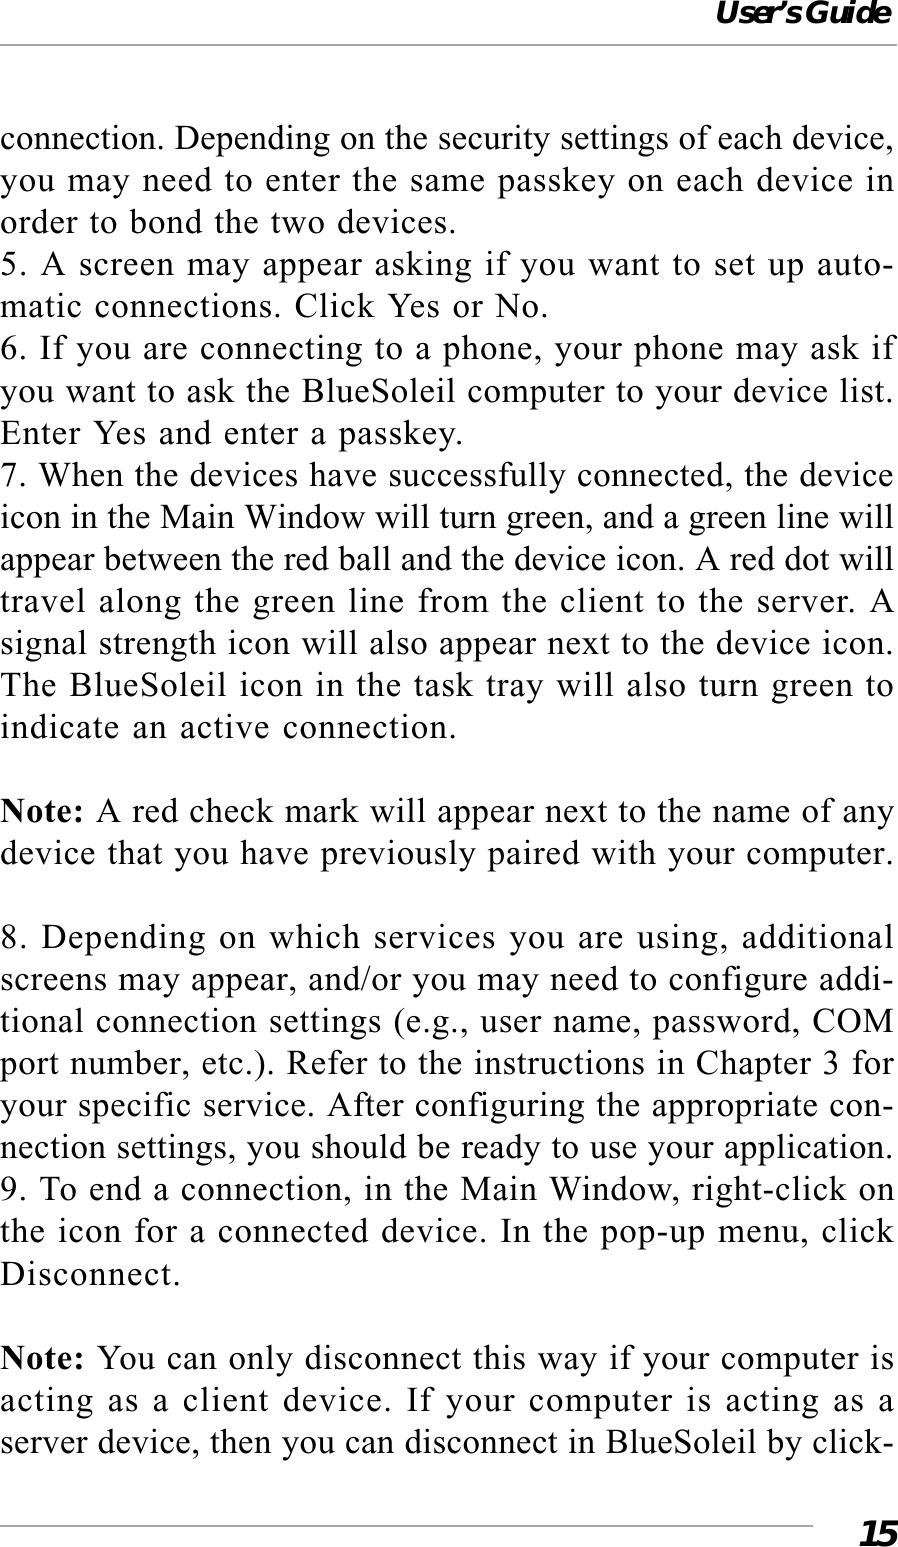 User’s Guide15connection. Depending on the security settings of each device,you may need to enter the same passkey on each device inorder to bond the two devices.5. A screen may appear asking if you want to set up auto-matic connections. Click Yes or No.6. If you are connecting to a phone, your phone may ask ifyou want to ask the BlueSoleil computer to your device list.Enter Yes and enter a passkey.7. When the devices have successfully connected, the deviceicon in the Main Window will turn green, and a green line willappear between the red ball and the device icon. A red dot willtravel along the green line from the client to the server. Asignal strength icon will also appear next to the device icon.The BlueSoleil icon in the task tray will also turn green toindicate an active connection.Note: A red check mark will appear next to the name of anydevice that you have previously paired with your computer.8. Depending on which services you are using, additionalscreens may appear, and/or you may need to configure addi-tional connection settings (e.g., user name, password, COMport number, etc.). Refer to the instructions in Chapter 3 foryour specific service. After configuring the appropriate con-nection settings, you should be ready to use your application.9. To end a connection, in the Main Window, right-click onthe icon for a connected device. In the pop-up menu, clickDisconnect.Note: You can only disconnect this way if your computer isacting as a client device. If your computer is acting as aserver device, then you can disconnect in BlueSoleil by click-